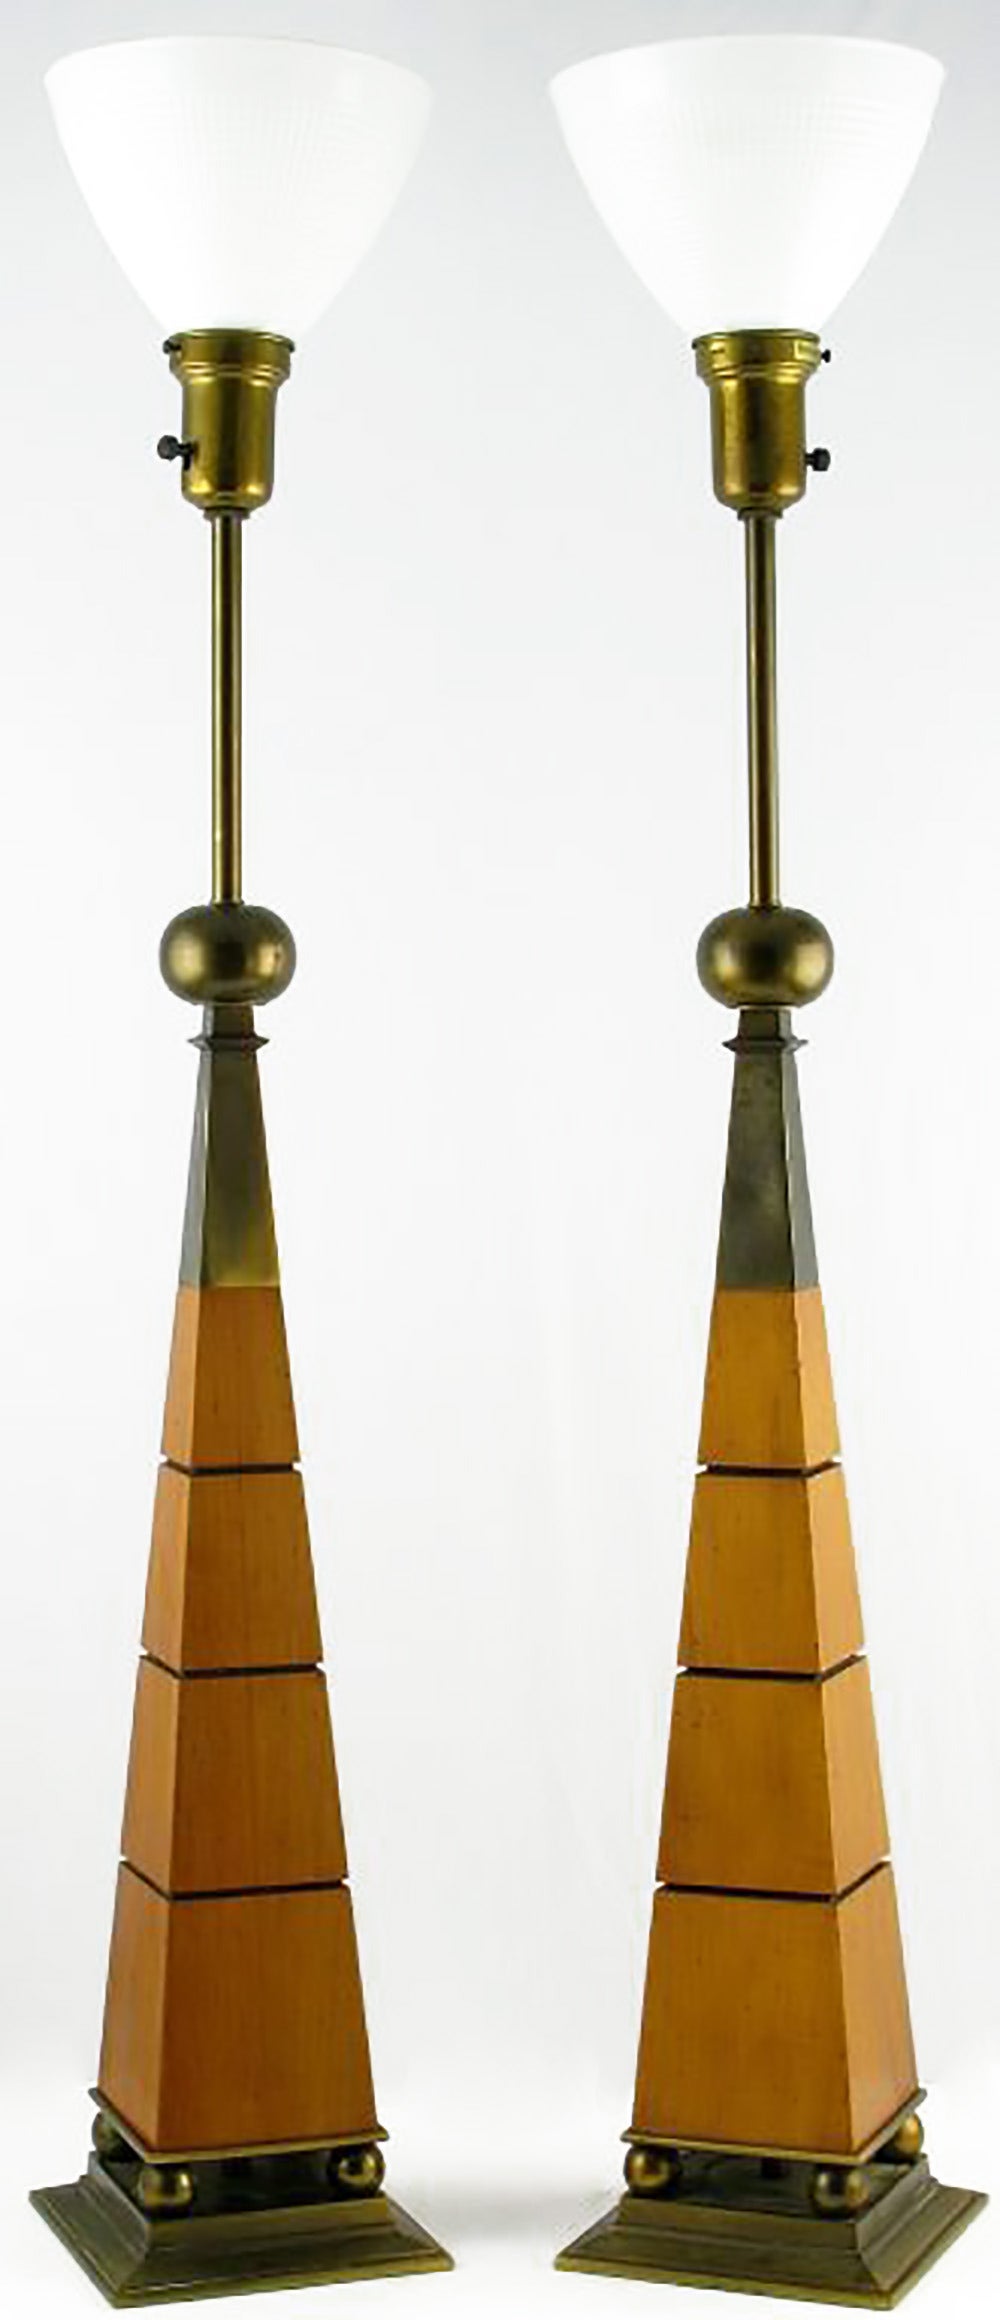 Architecturally inspired pair of table lamps by Stiffel. Four brass spheres atop a plinth base support a walnut obelisk-form body with horizontal incised and ebonized decoration. Surmounting the wood is a brass obelisk topped by a larger brass